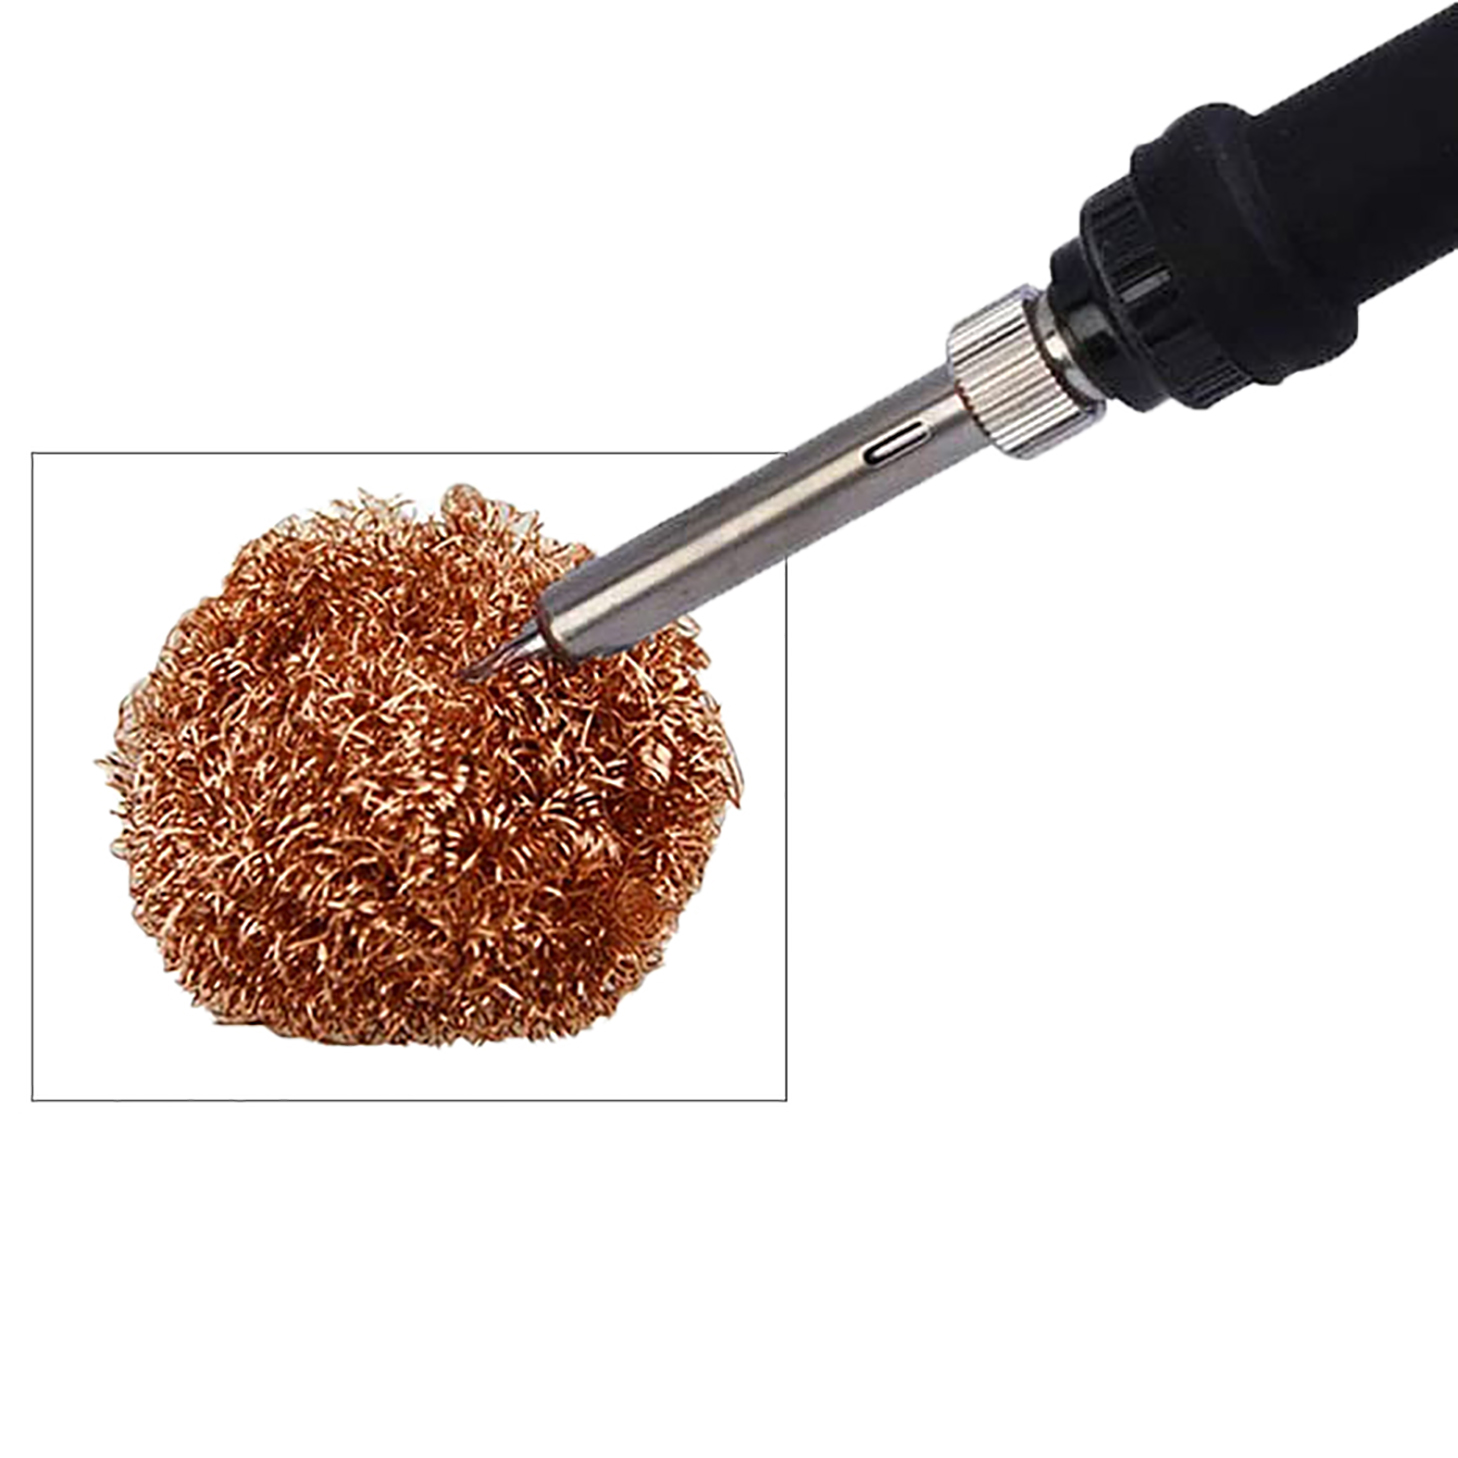 Reuseable Welding Soldering Iron Tip Cleaning Wire Ball Metal Welding Clean Tools for Cleaning Soldering Irons and Tips